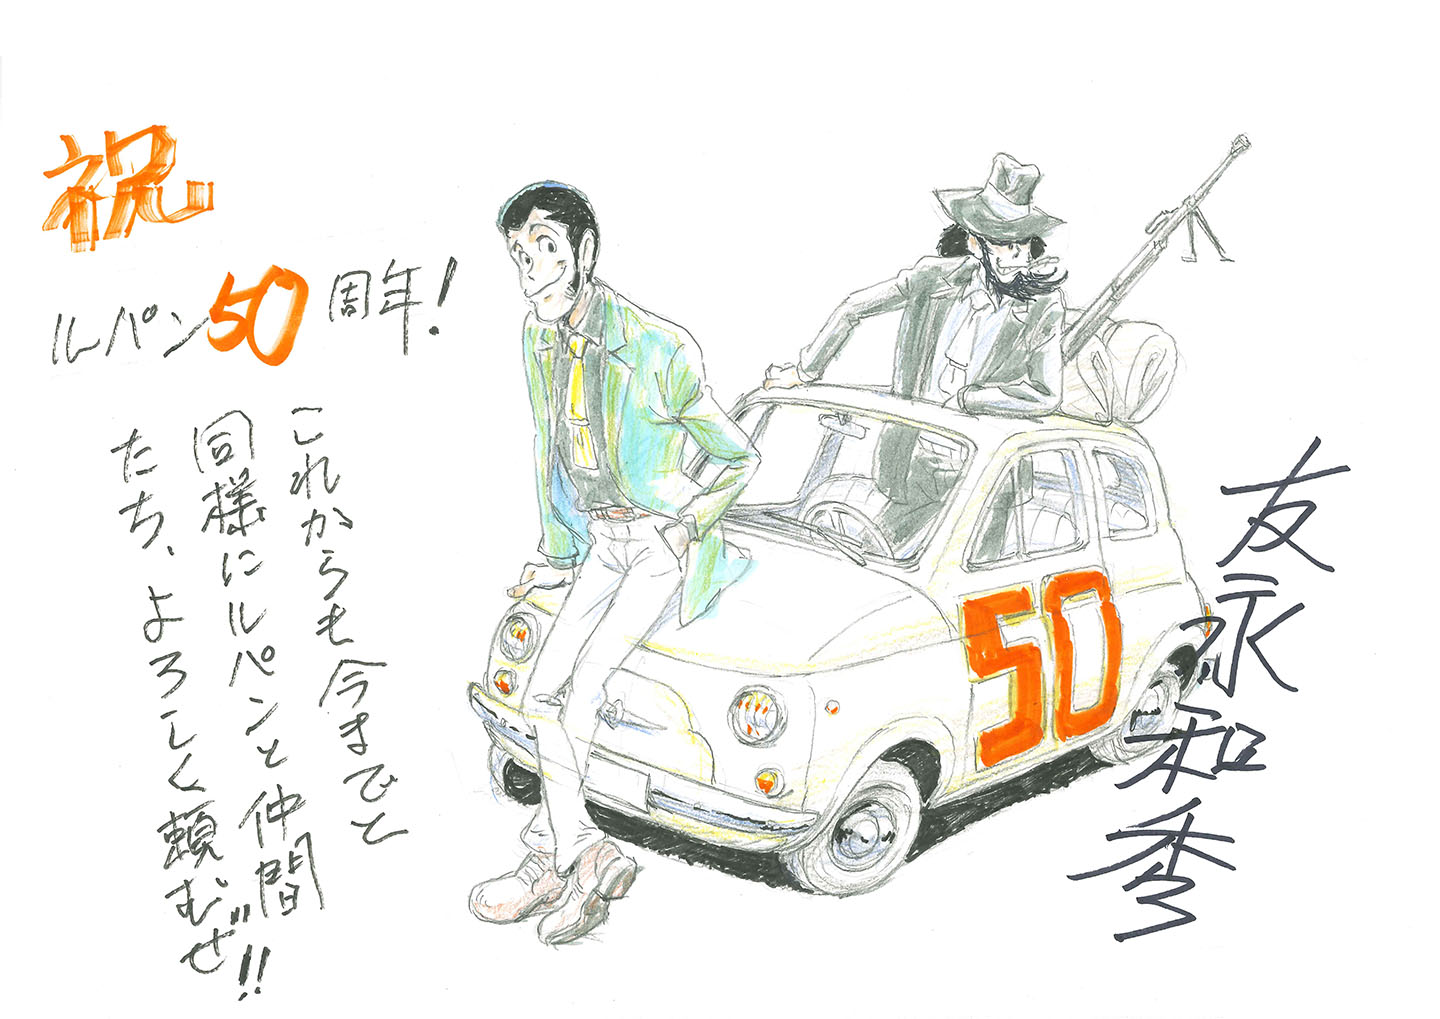 Lupin III’s Celebrates 50th Anniversary with Tributes